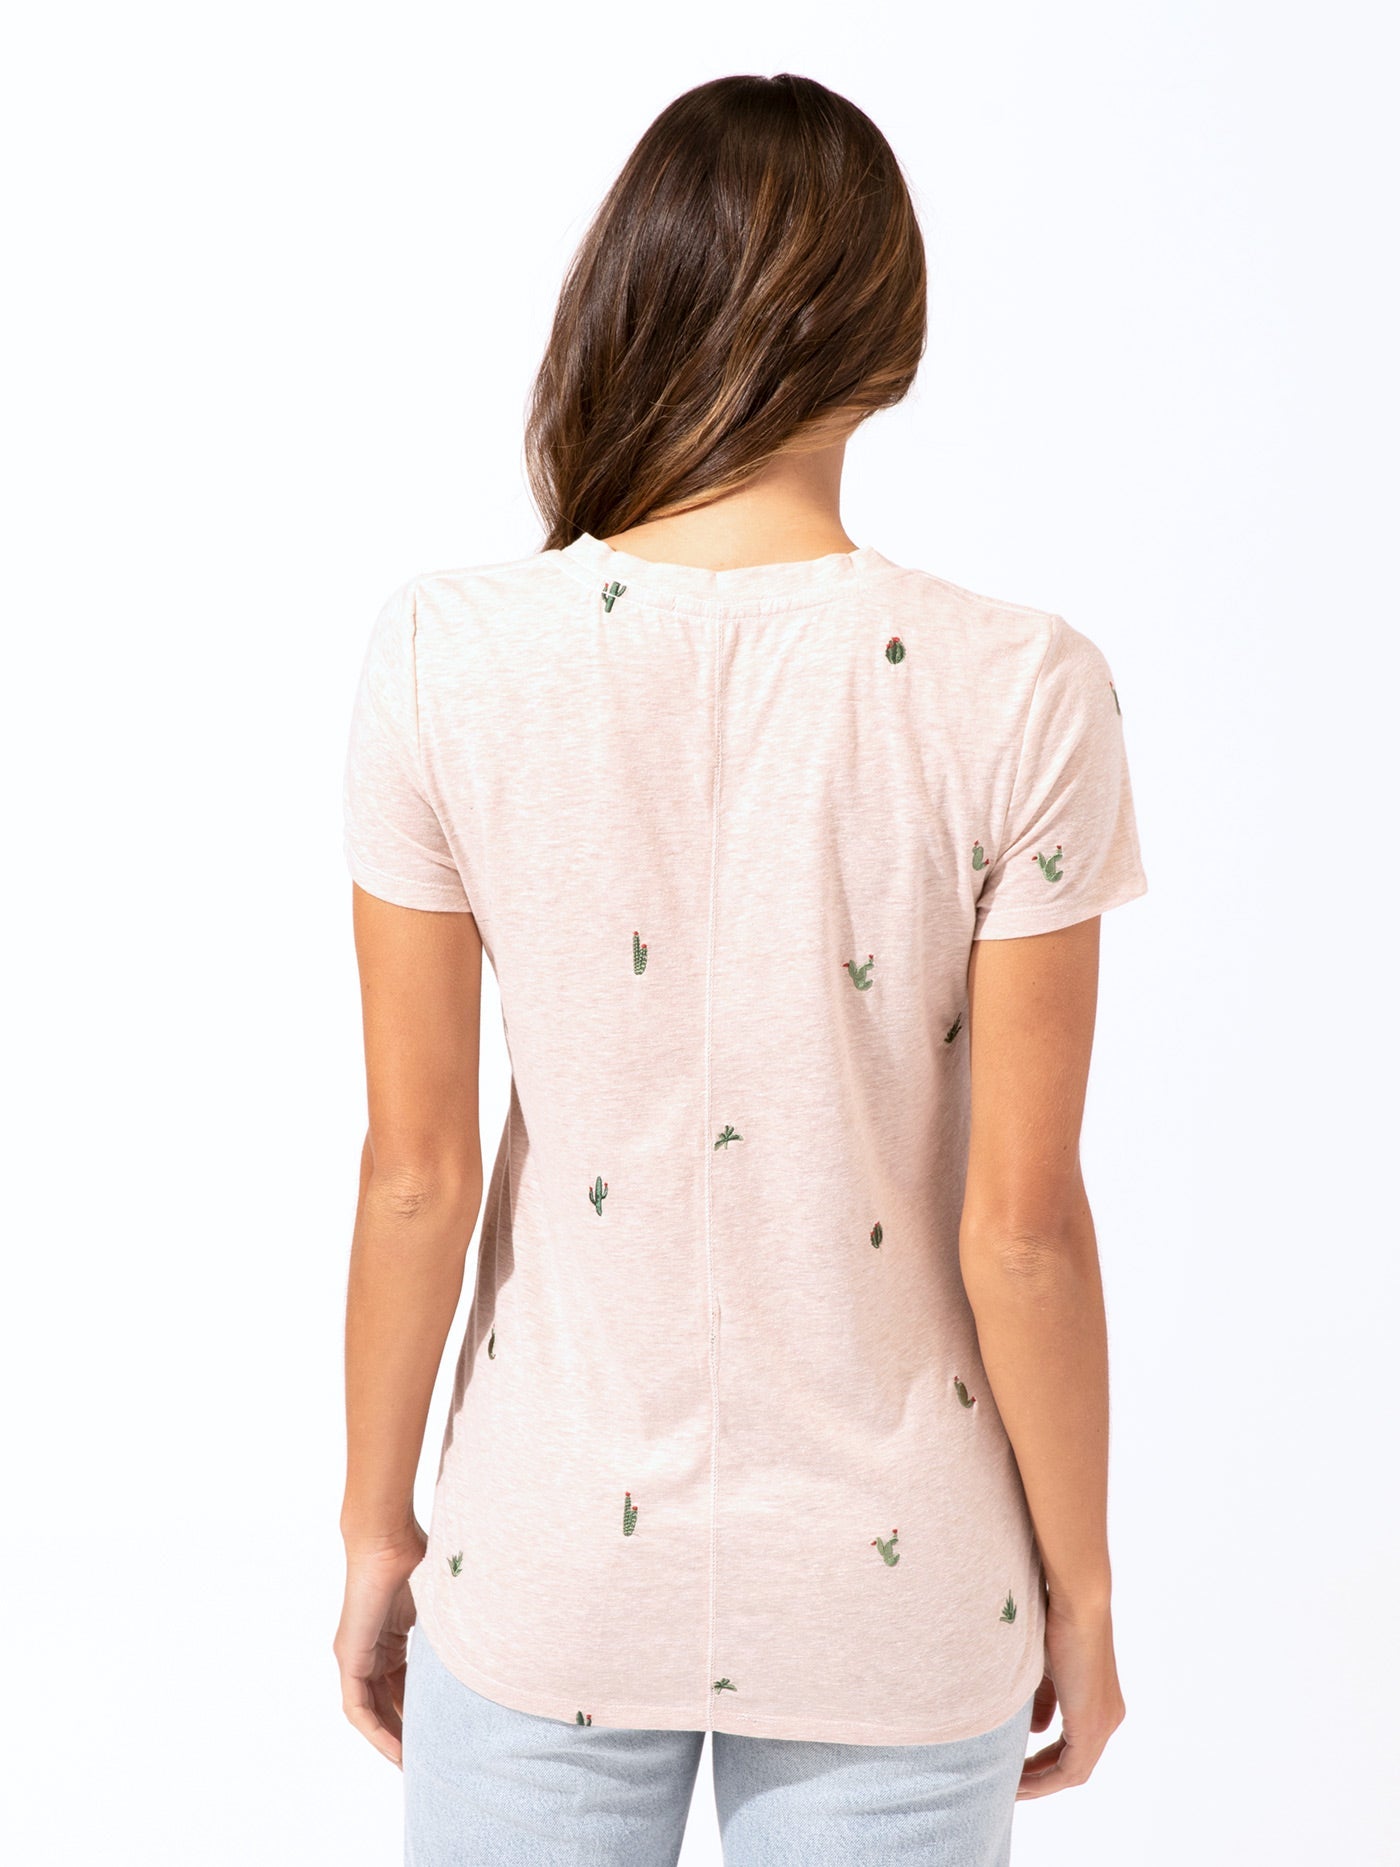 Cacti Embroidery V-Neck Tee Womens Tops Short Threads 4 Thought 